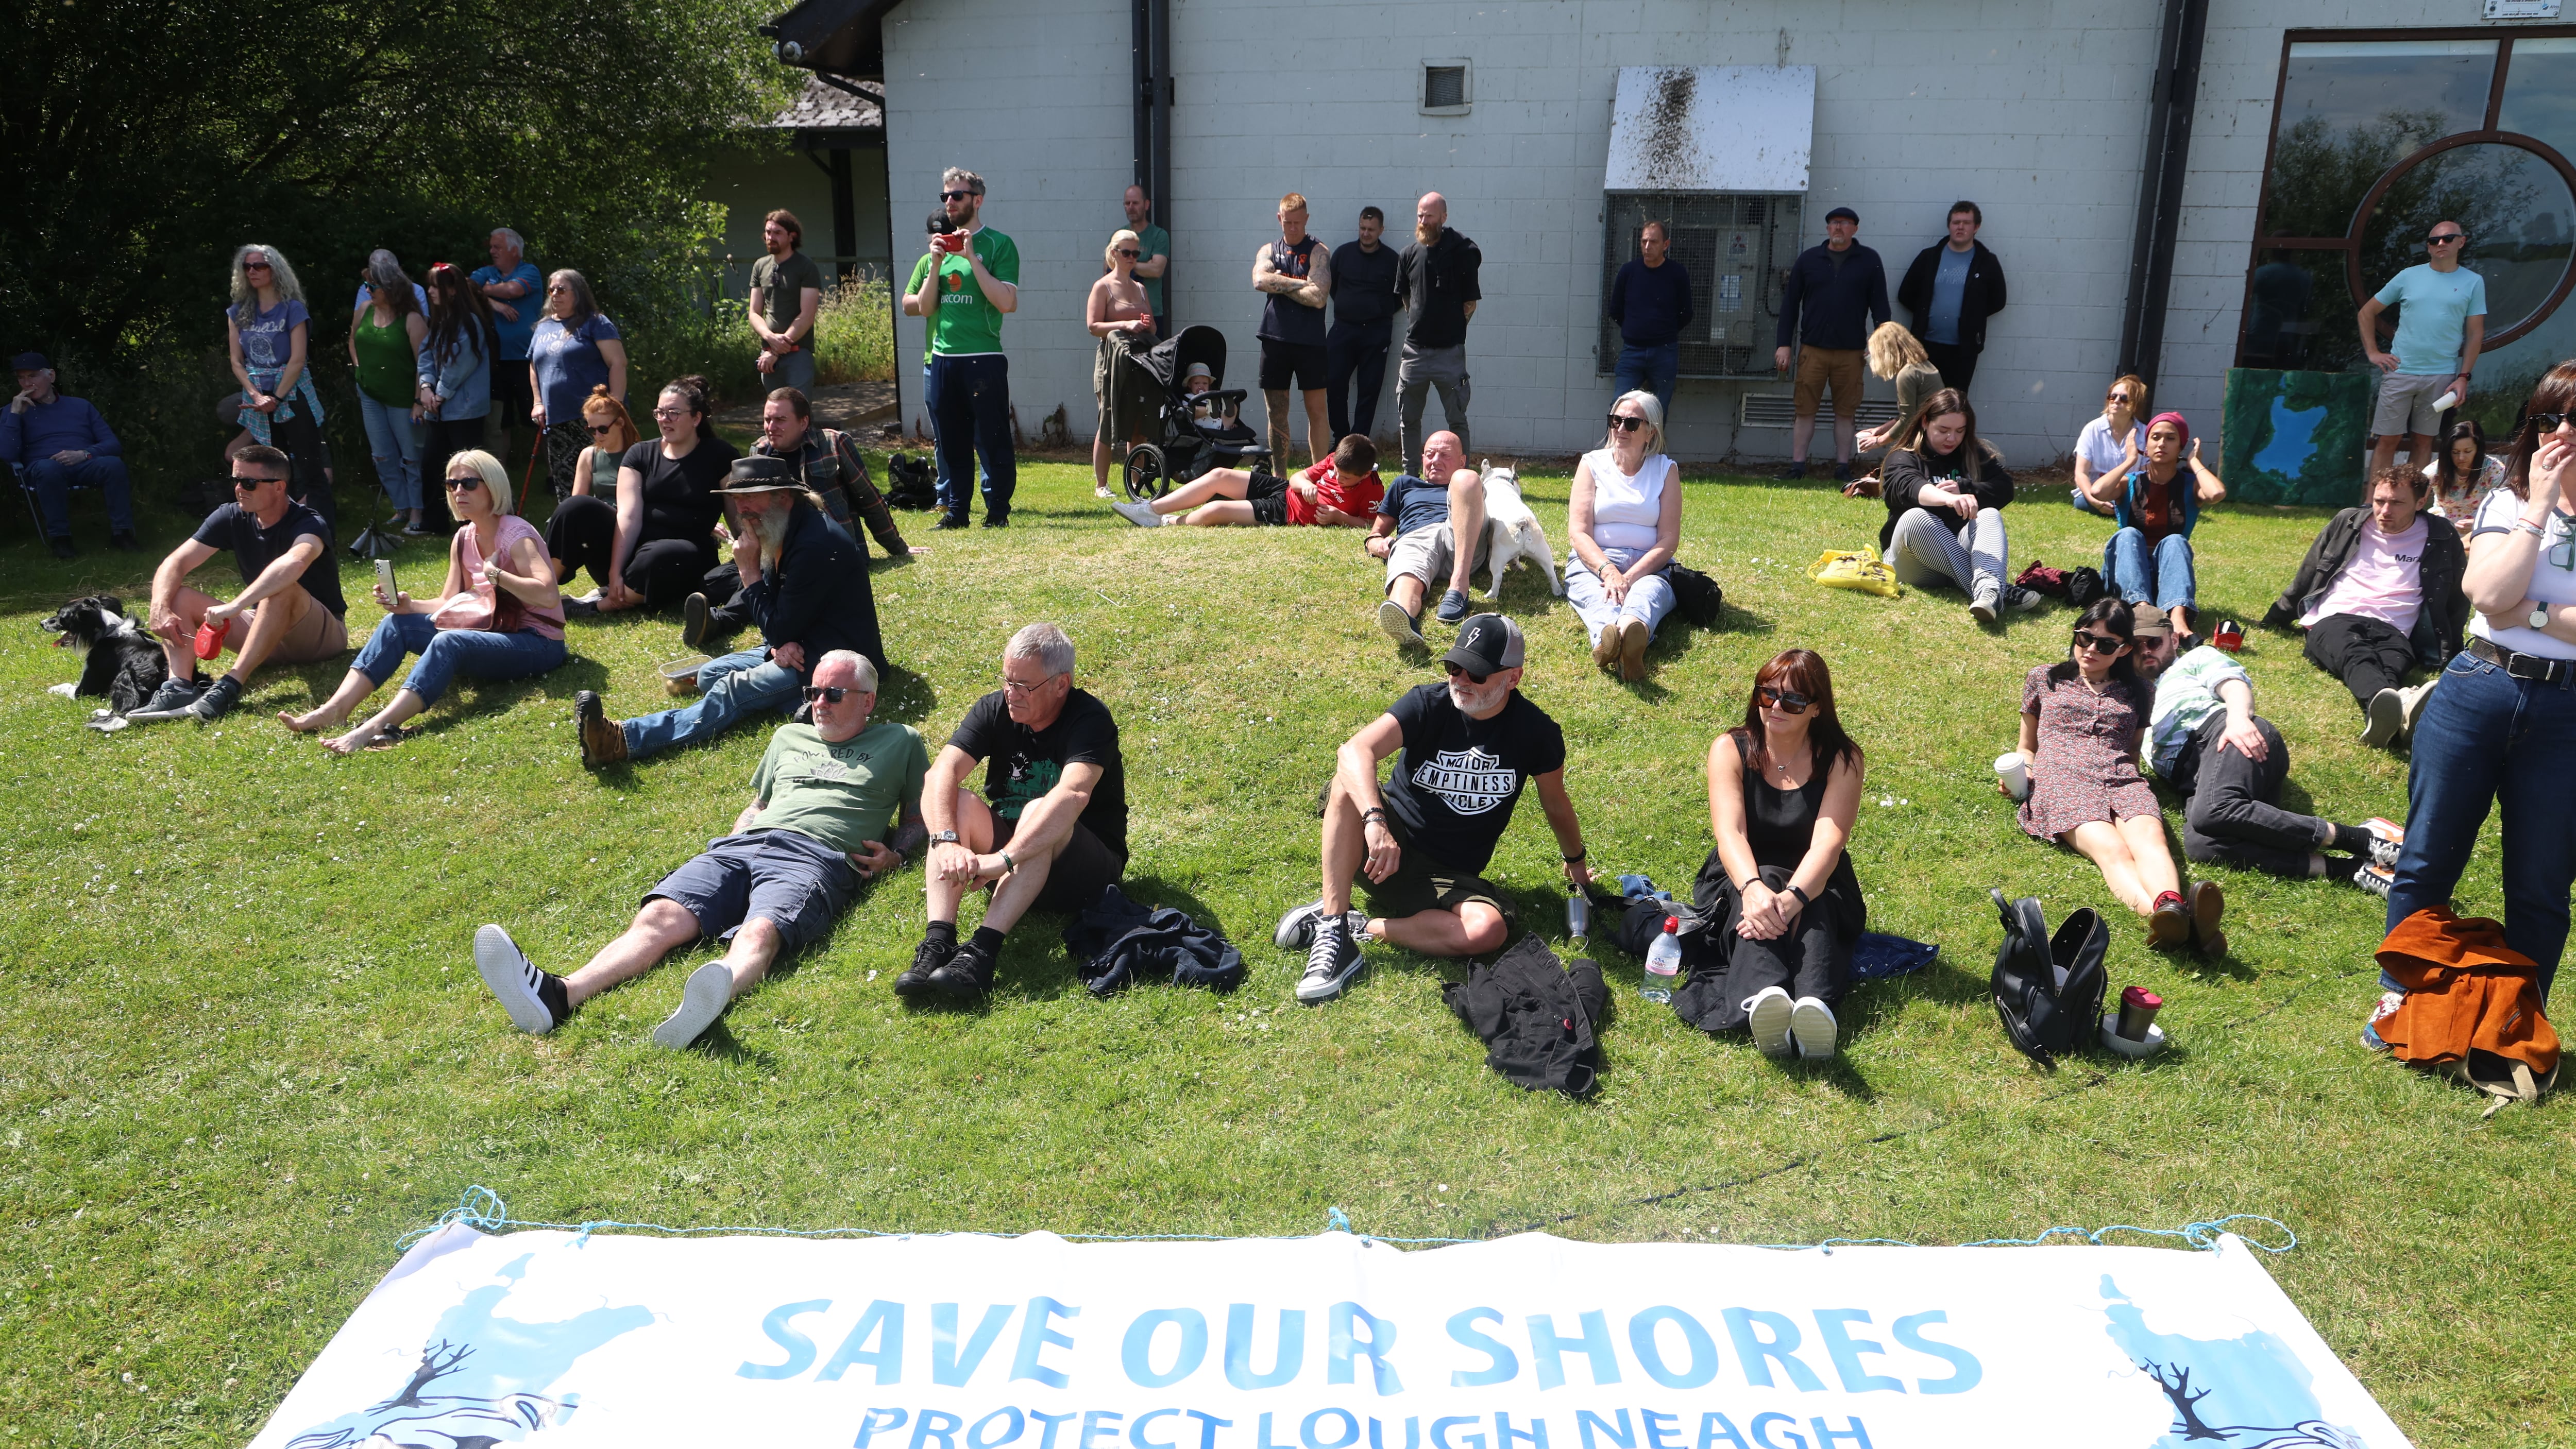 Environmental campaigners hold a protest at Oxford Island, Lough Neagh. Picture: MAL MCCANN